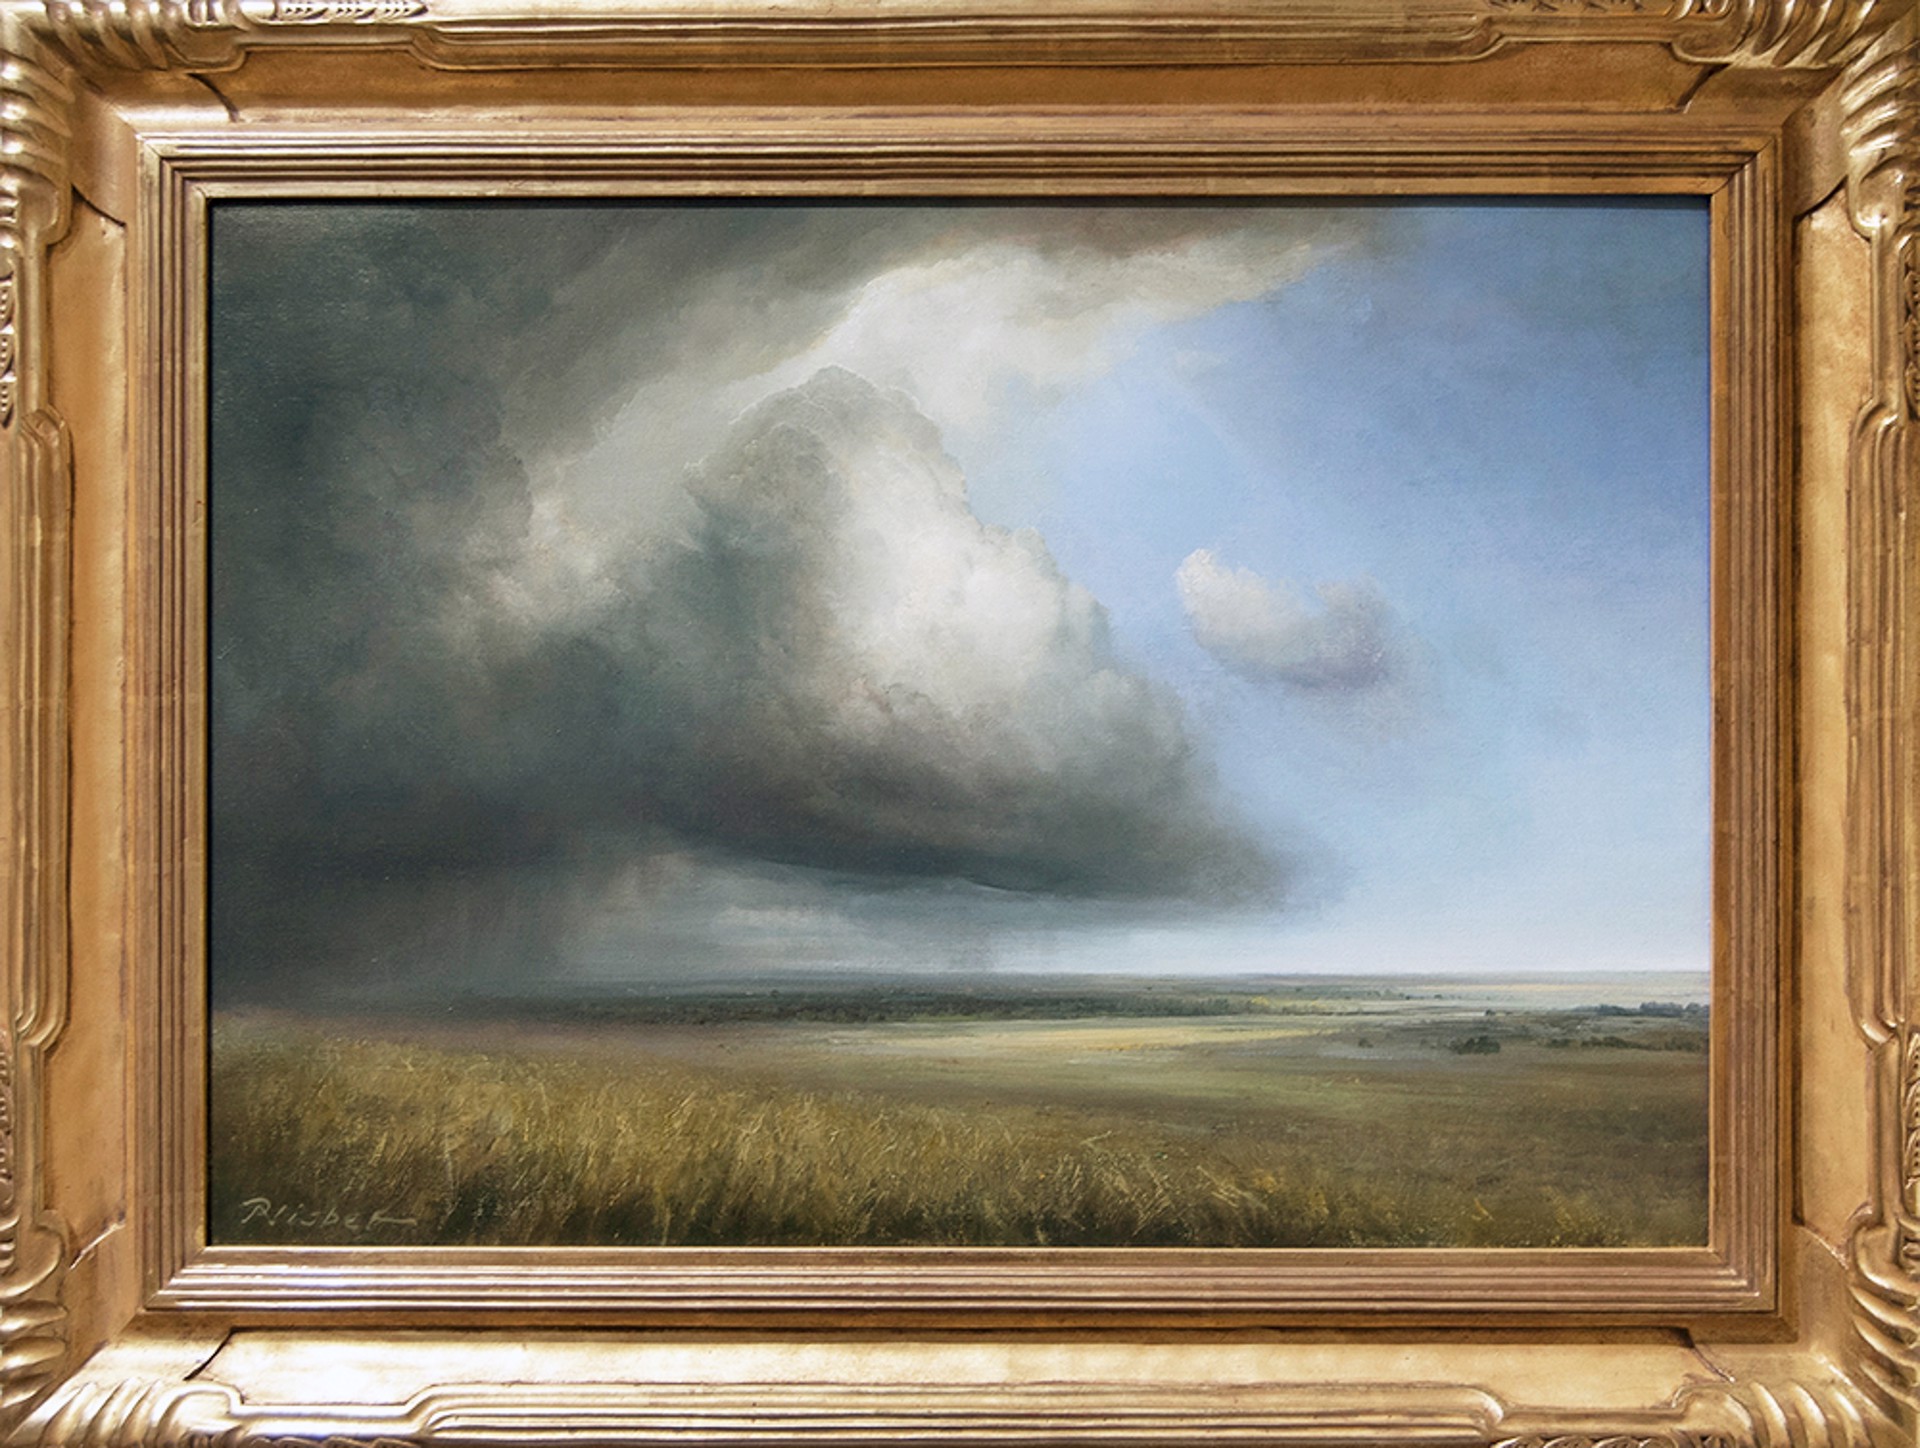 Thunder Comes Running, Little Big Horn by P.A Nisbet